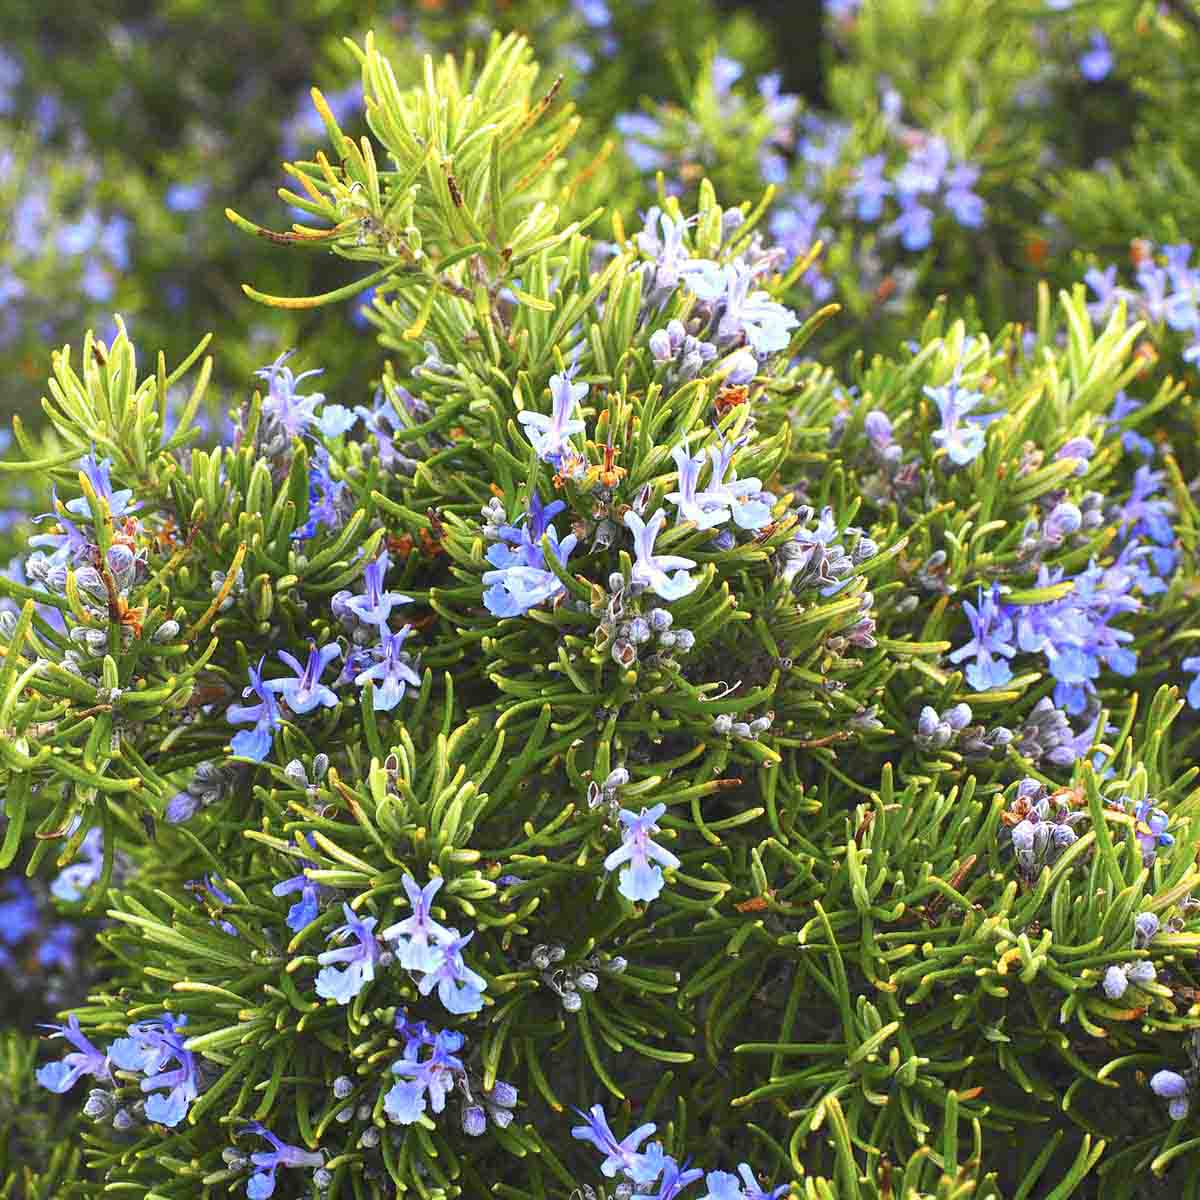 deep green, spikey rosemary plant covered in light blue blossoms.